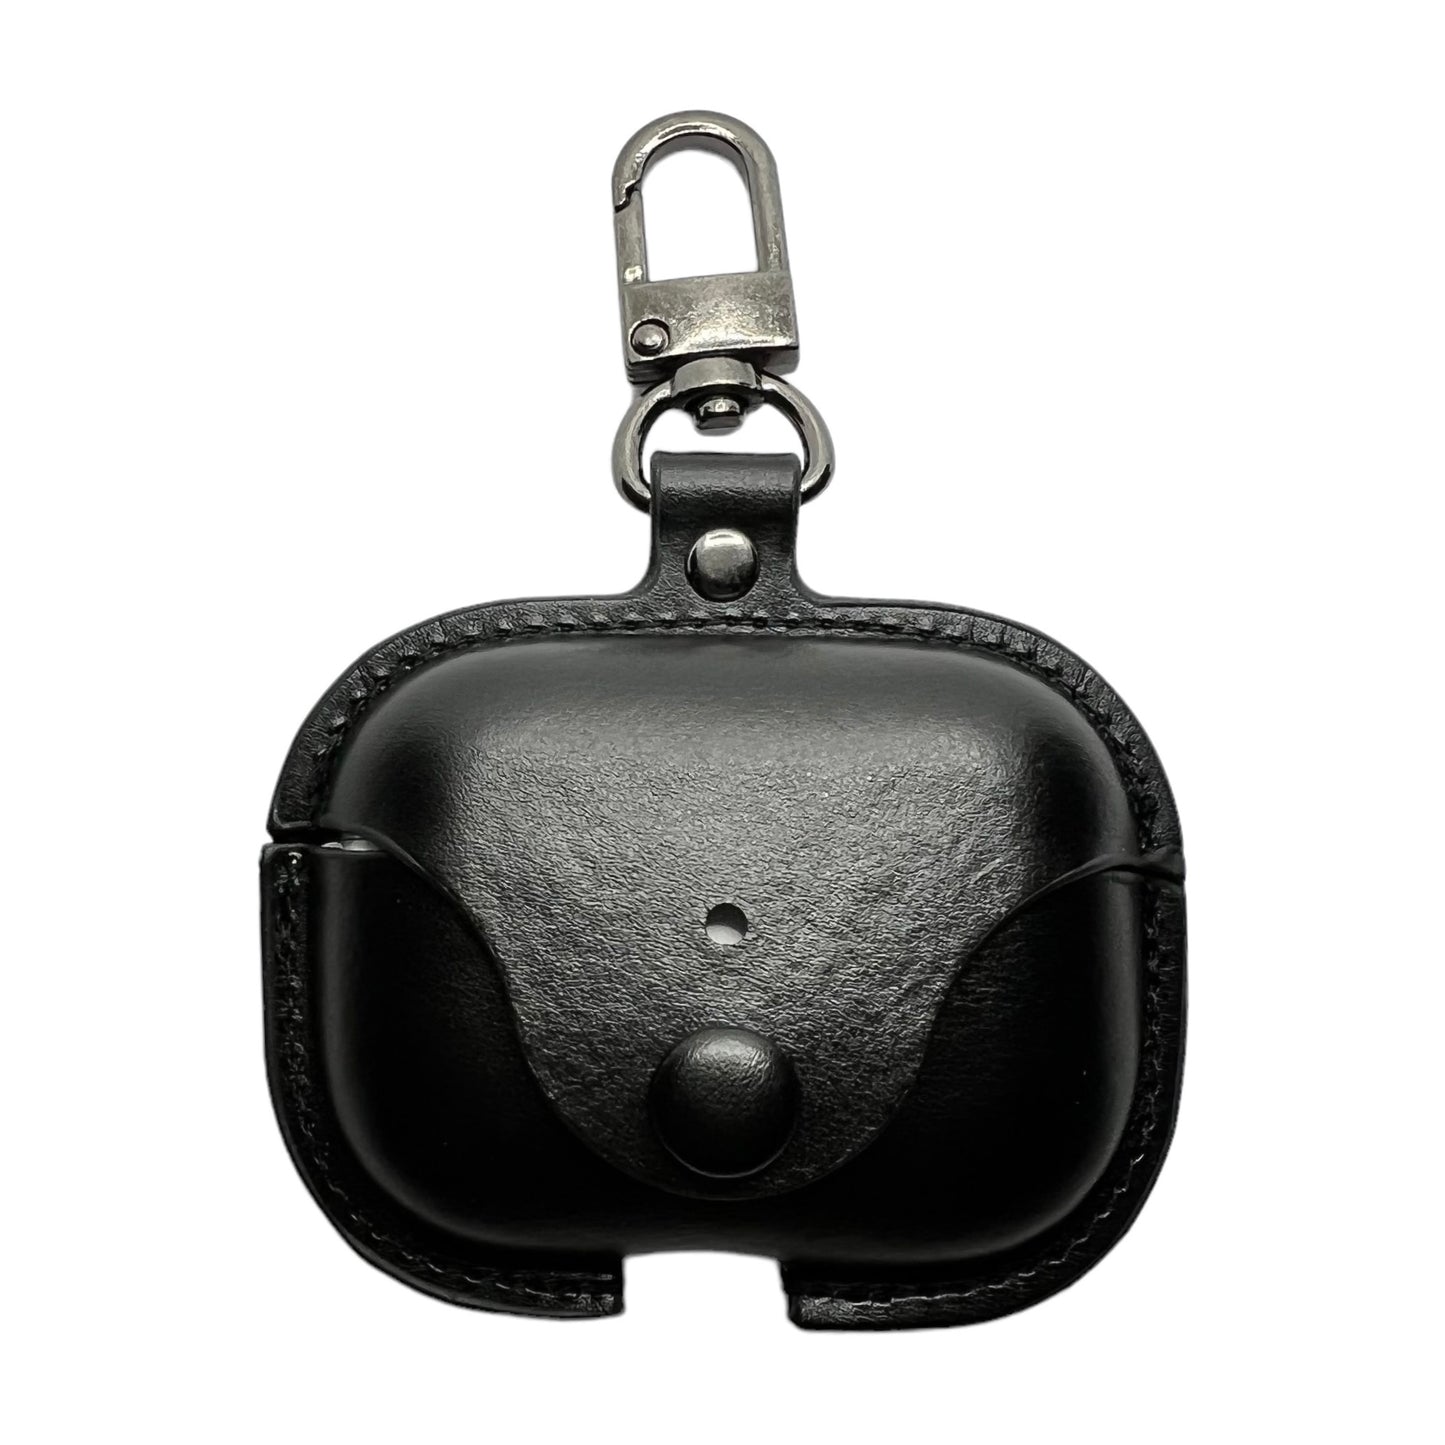 JenDore Black Leather Button Protective Carrying Pouch Case Cover with Keychain for AirPods Pro